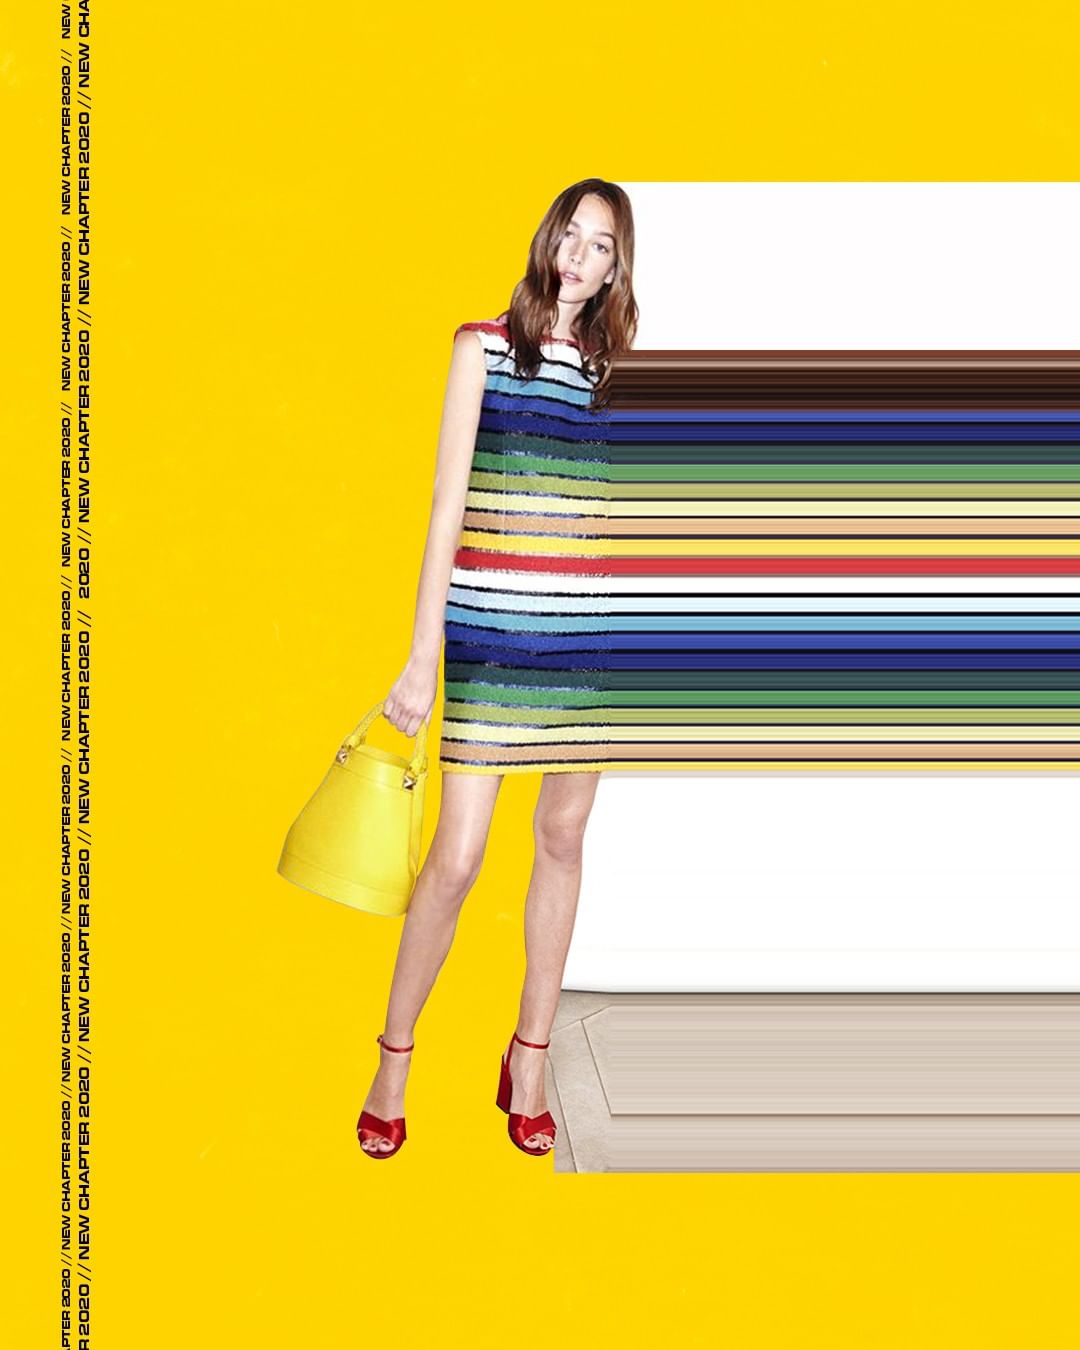 Sonia Rykiel - DARE. There is no such thing as too many colors. ⁠
#SoniaRykiel #FollowTheStripes #mode #otd